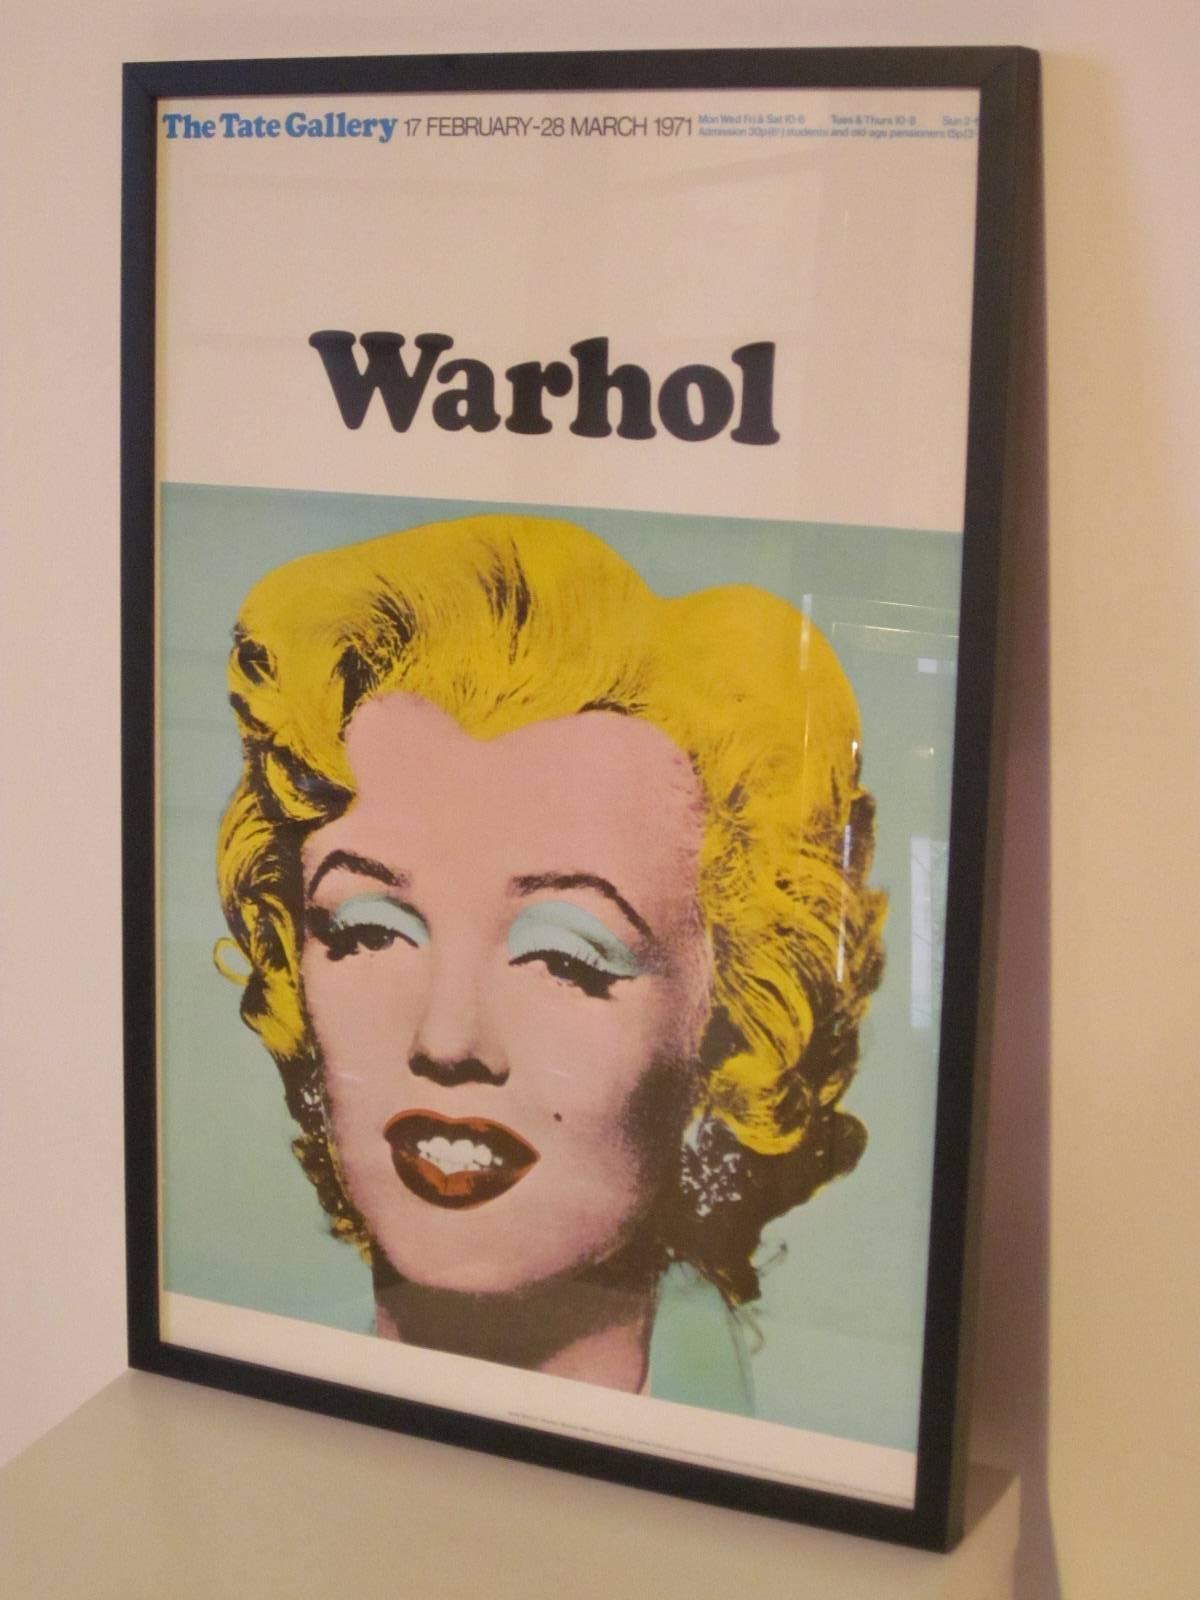 Modern Marilyn Monroe poster after Andy Warhol from the Tate Gallery